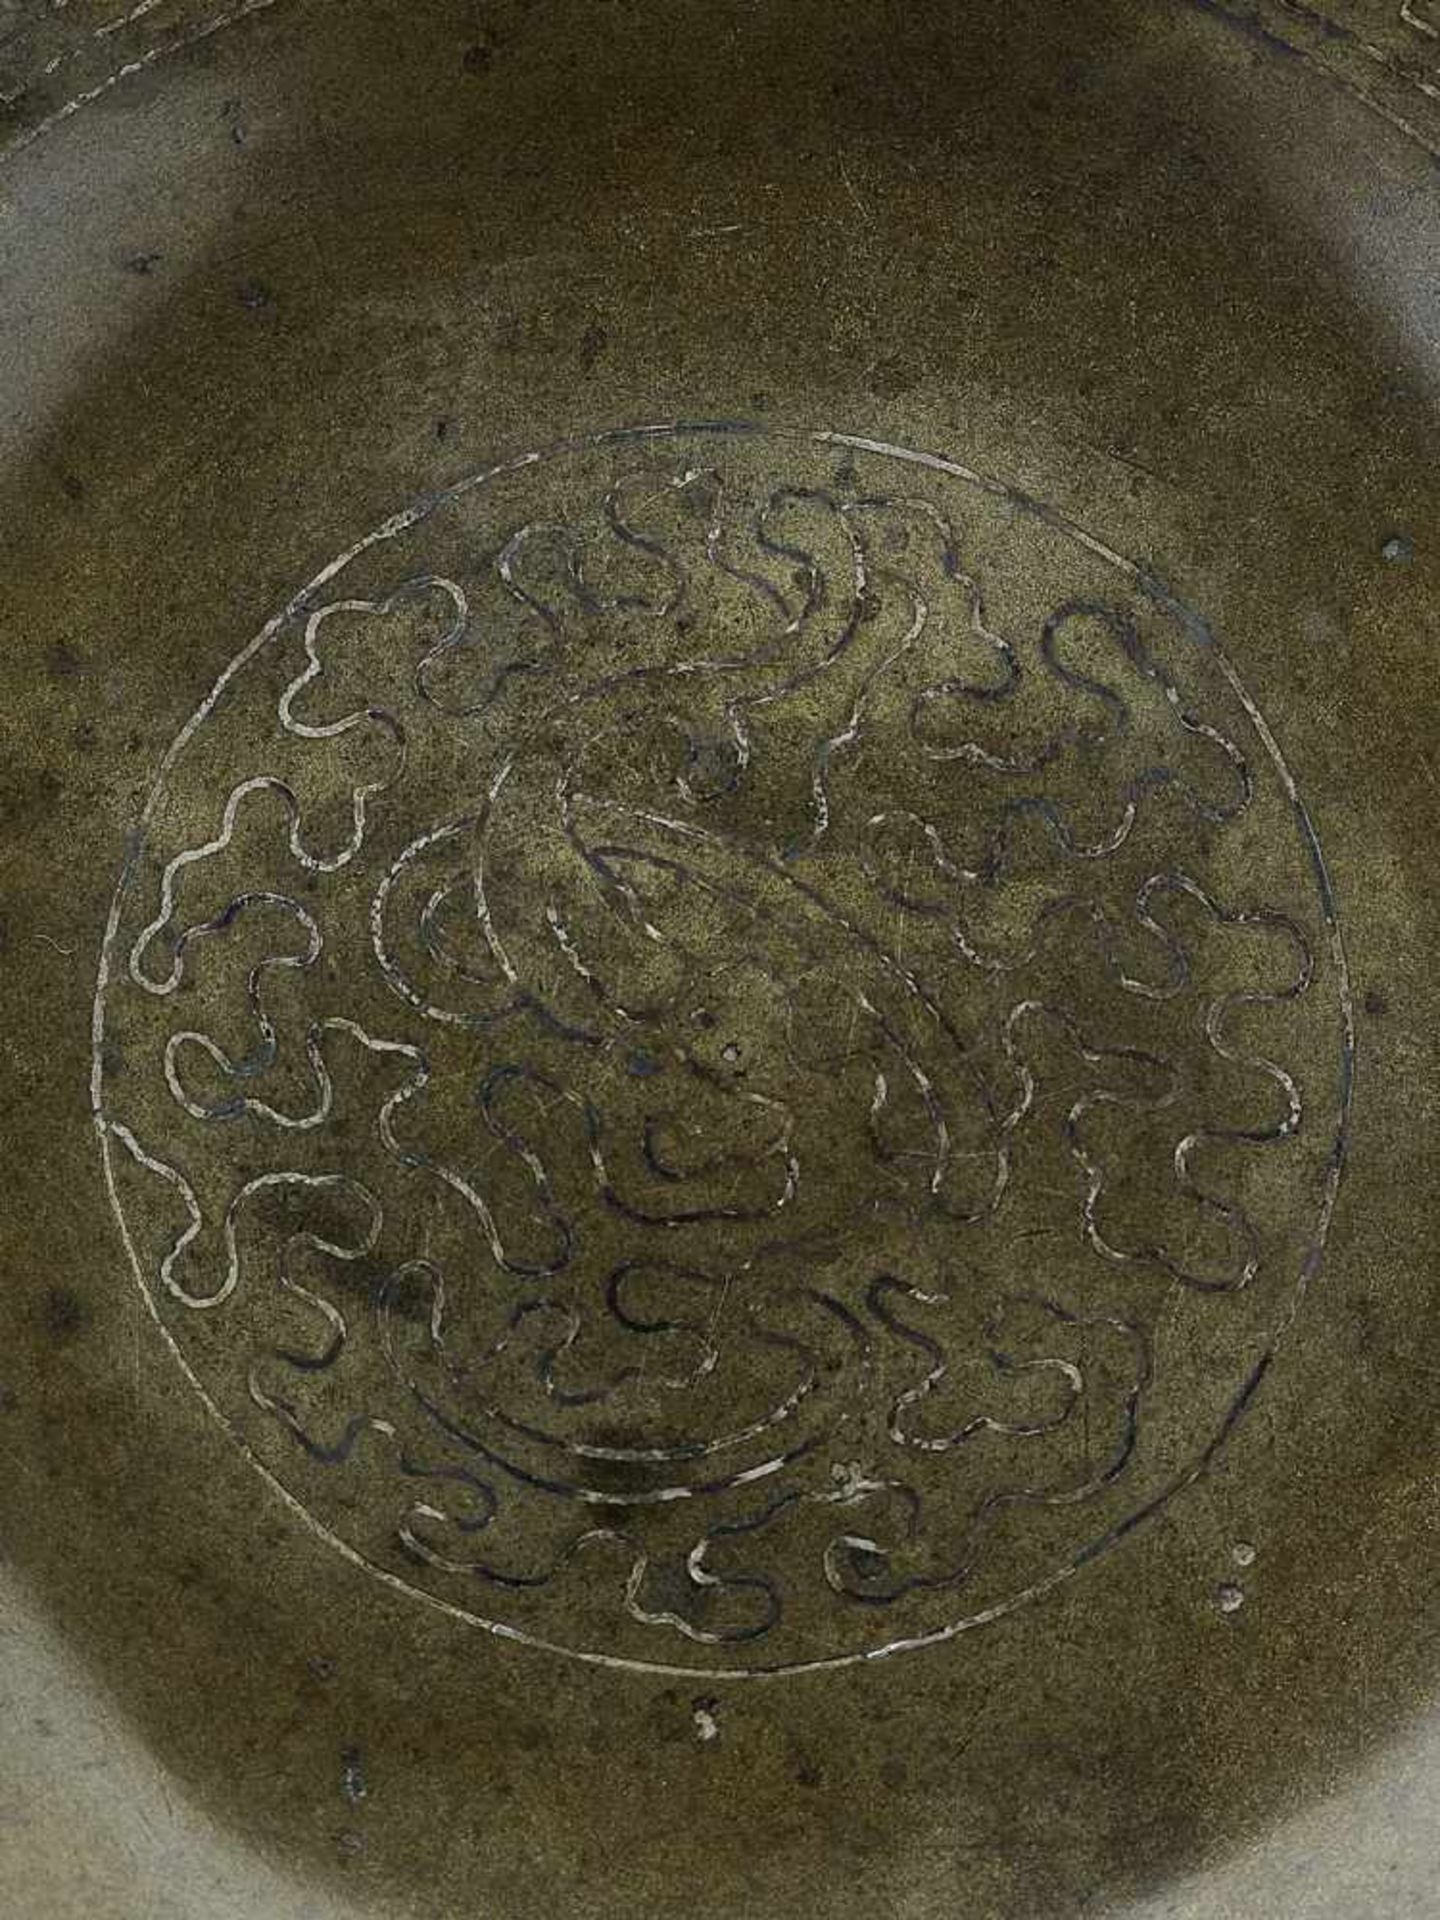 A SHISOU SILVER-INLAID BRONZE TRAY China, 17th century. Silver-inlaid two-character signature Shisou - Image 2 of 6